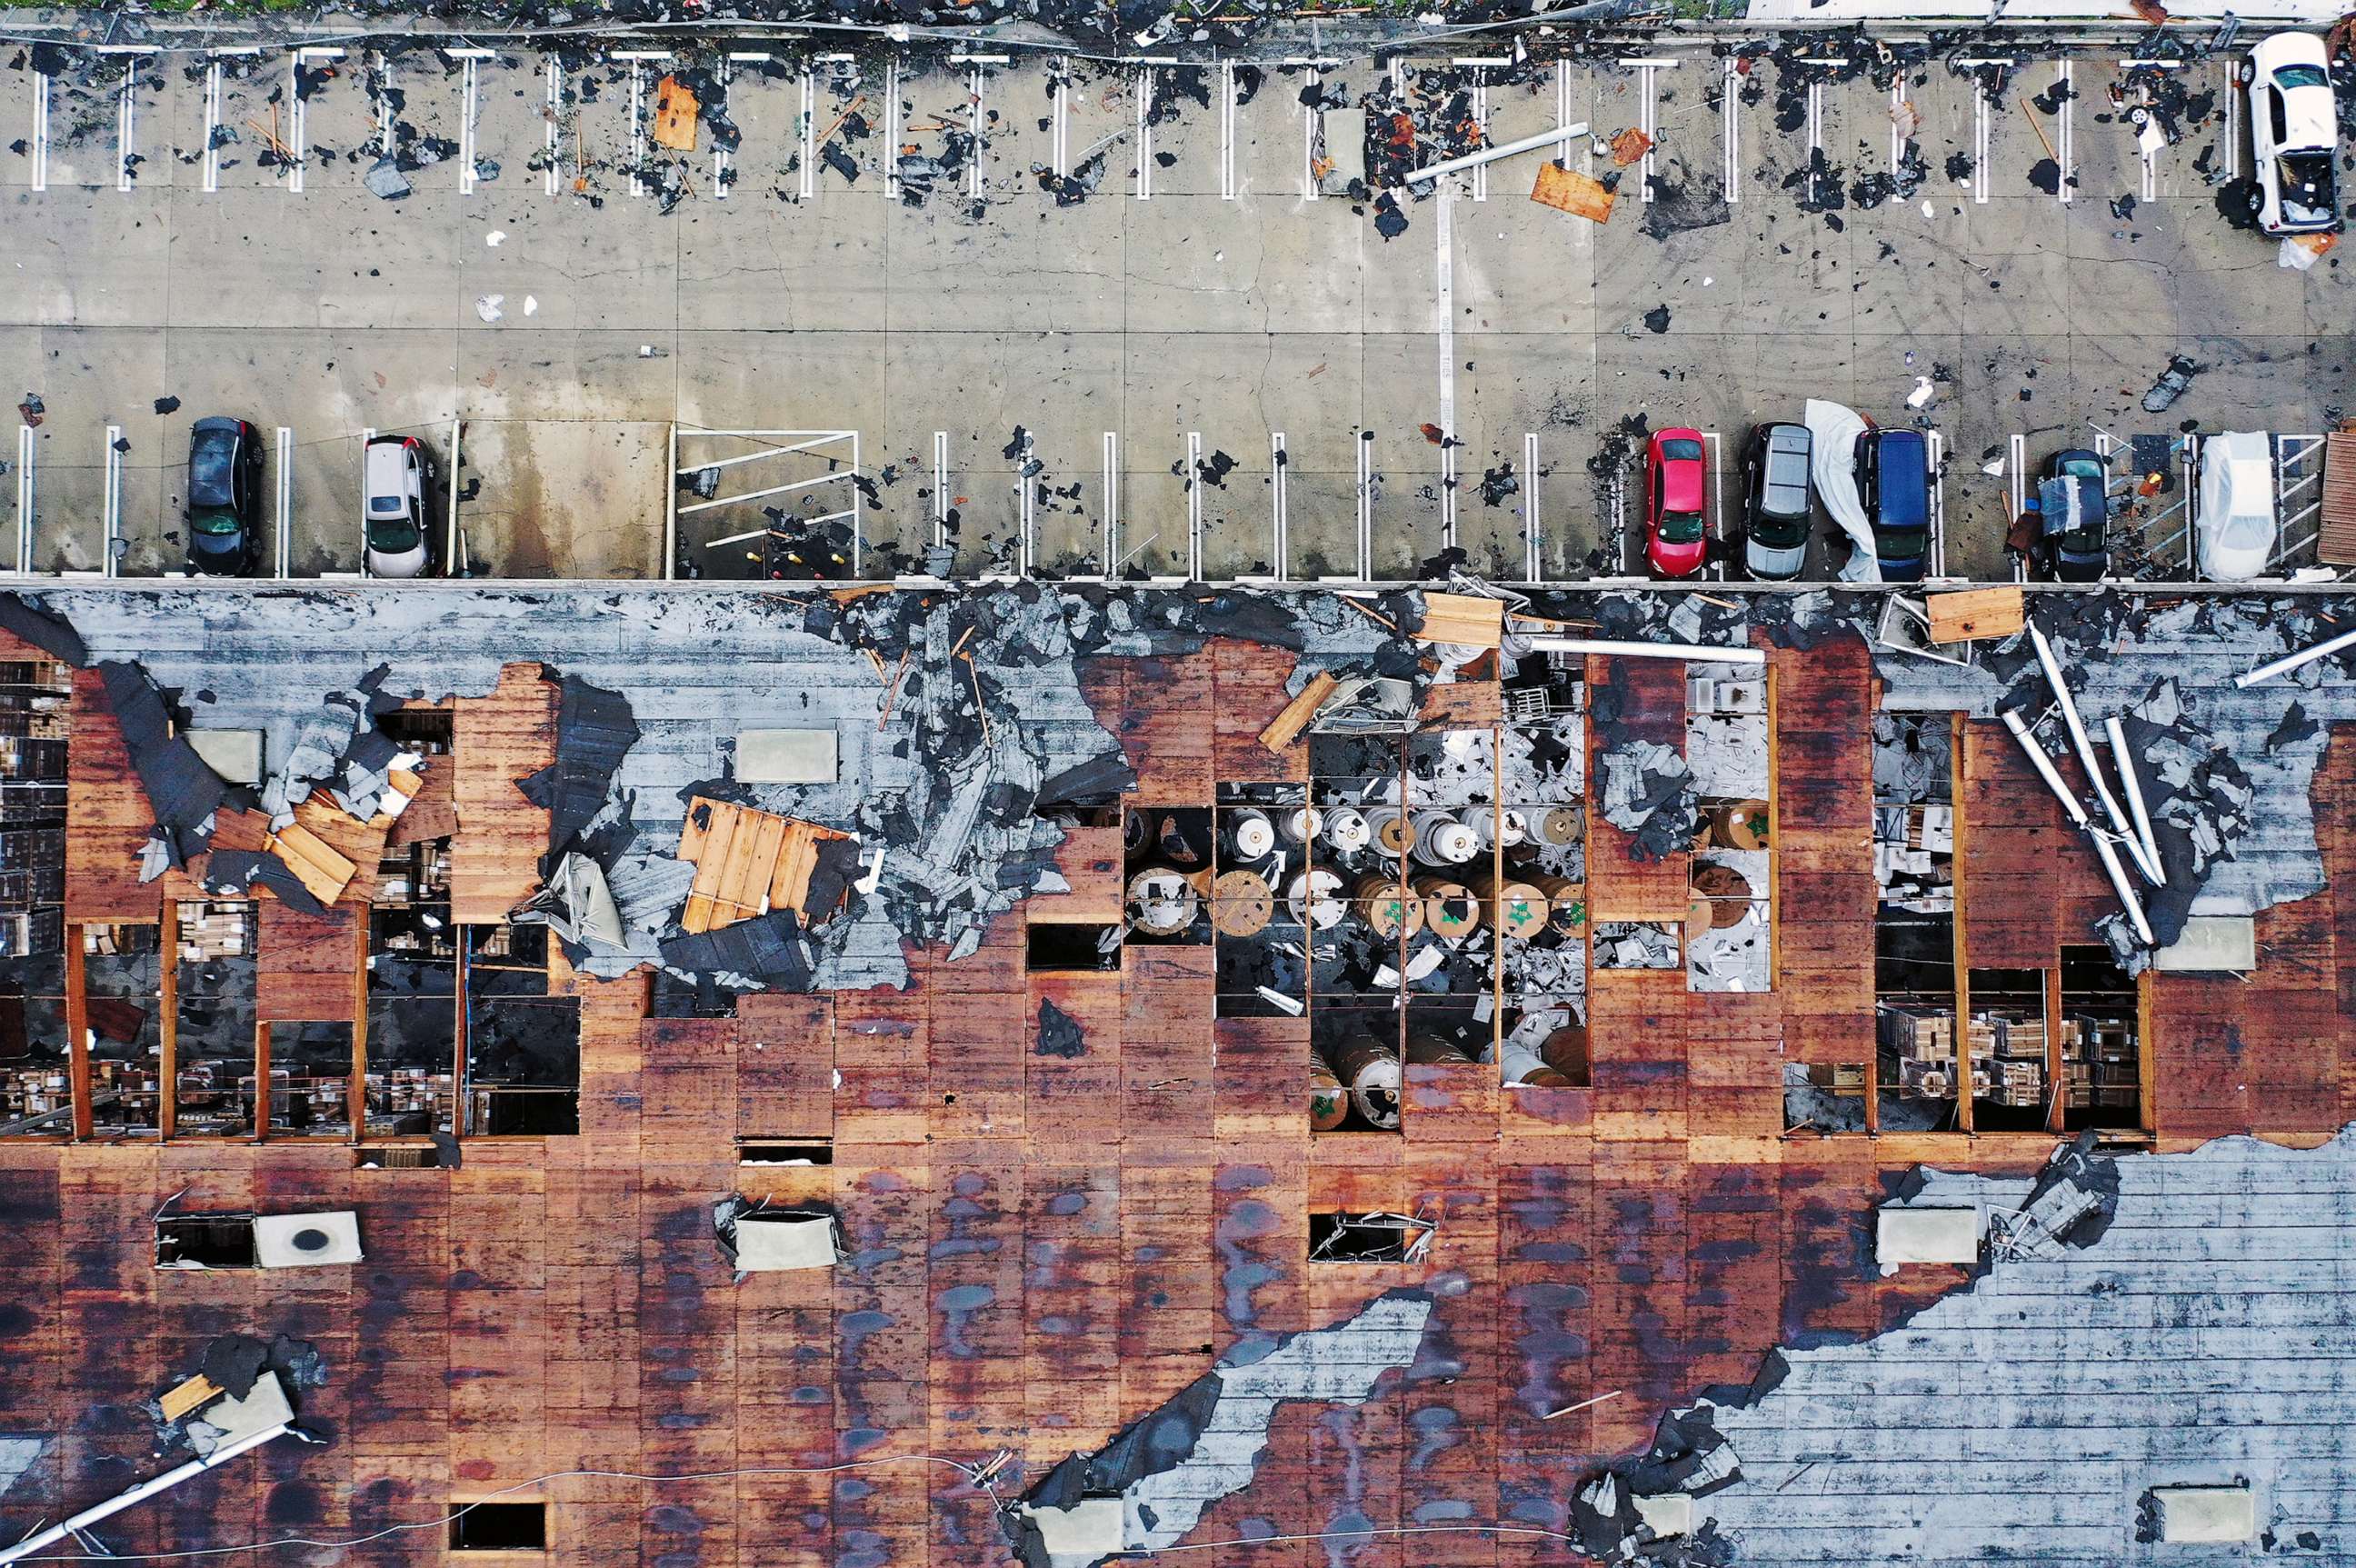 PHOTO: An aerial view of roof damage after a rare confirmed tornado touched down and ripped up building roofs in a Los Angeles suburb of Montebello, March 22, 2023.